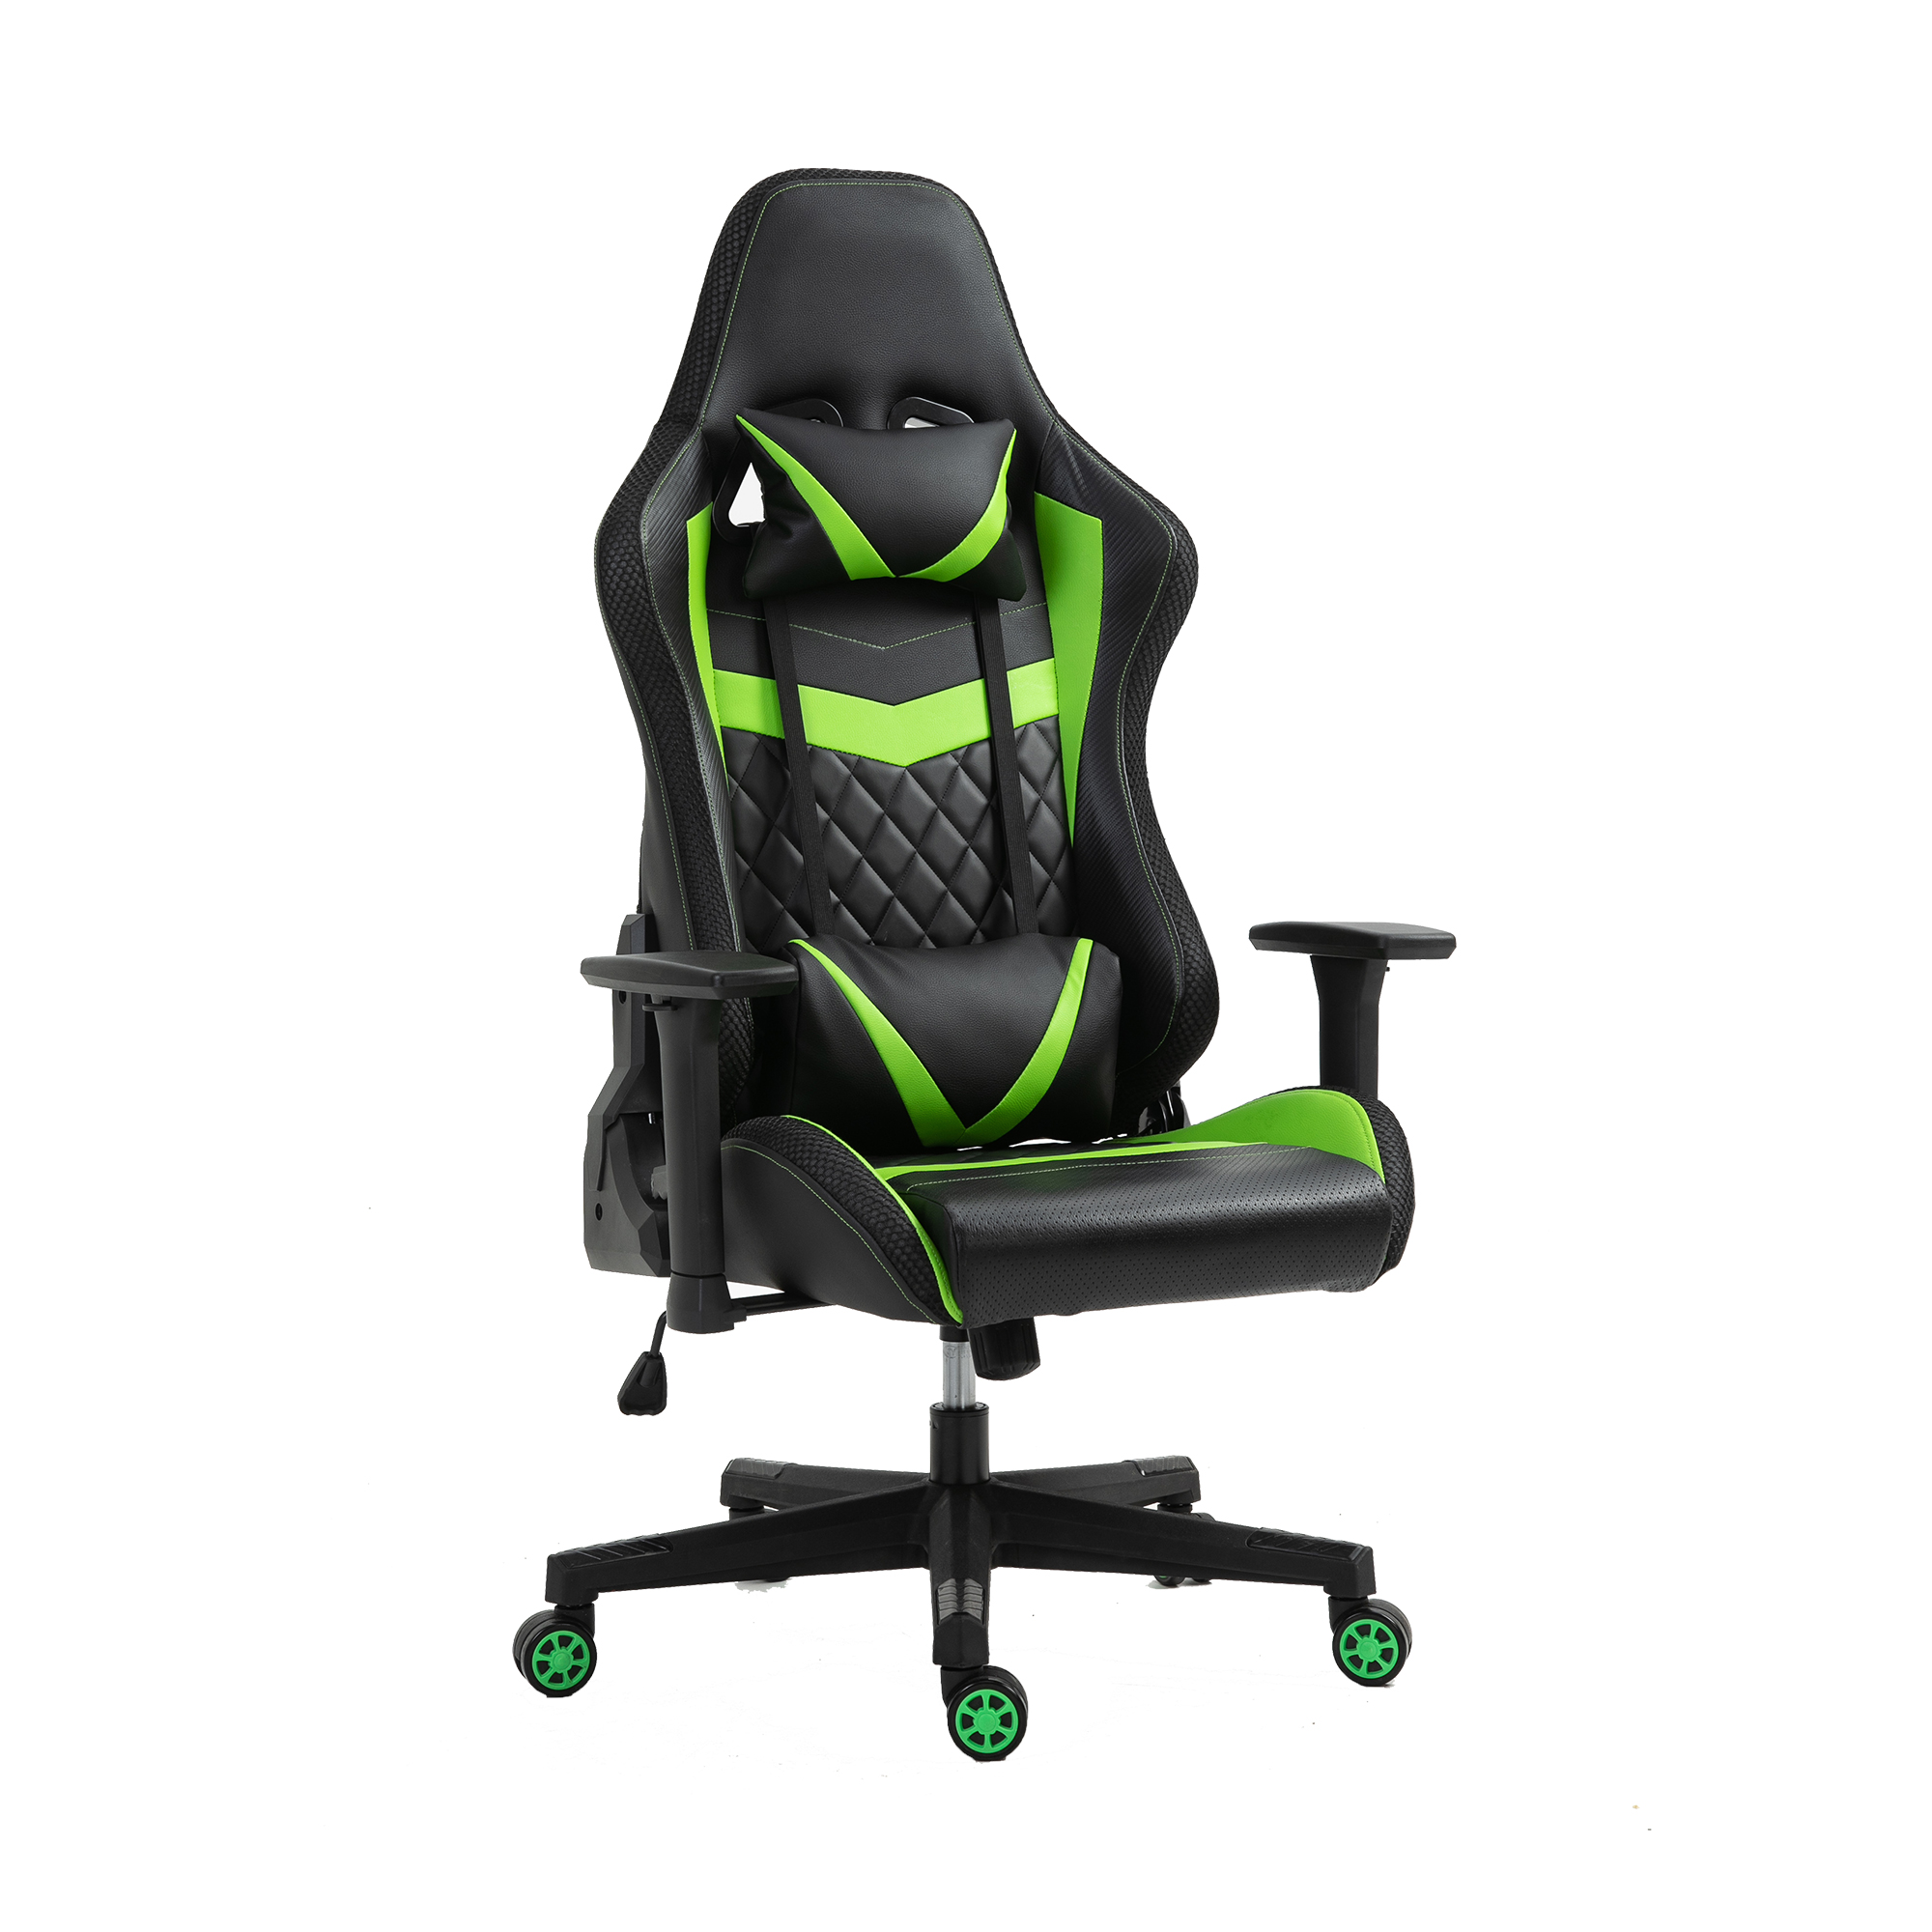 China wholesale Orange Gaming Chair Manufacturer –  Free Sample Hot Selling Cheap Leather Racing Chair For Gamer Home Office Chairs PC Gaming Setups – ANJI JIFANG